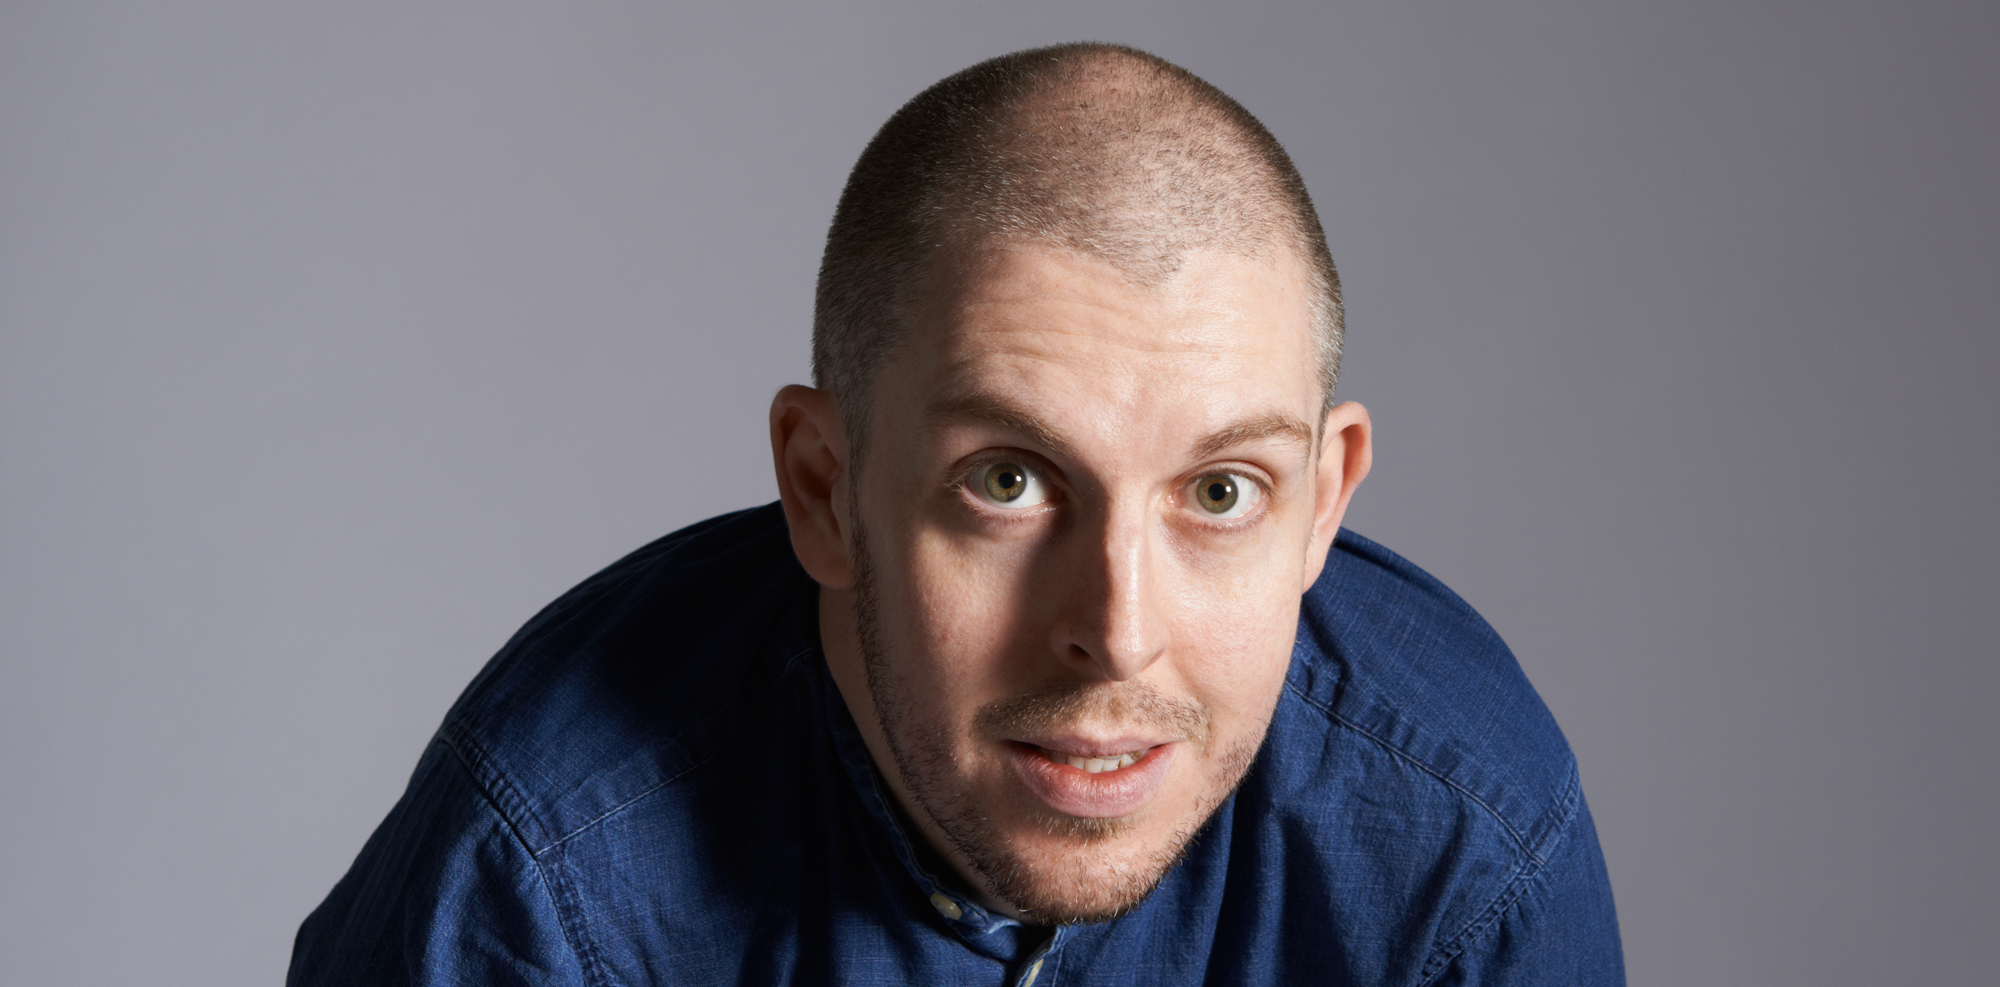 DOUBLE EDINBURGH COMEDY AWARD NOMINEE CARL DONNELLY INVITES FANS TO GUEST HOST ON ACCLAIMED PODCAST WHILST TOURING BAD MAN TINGS